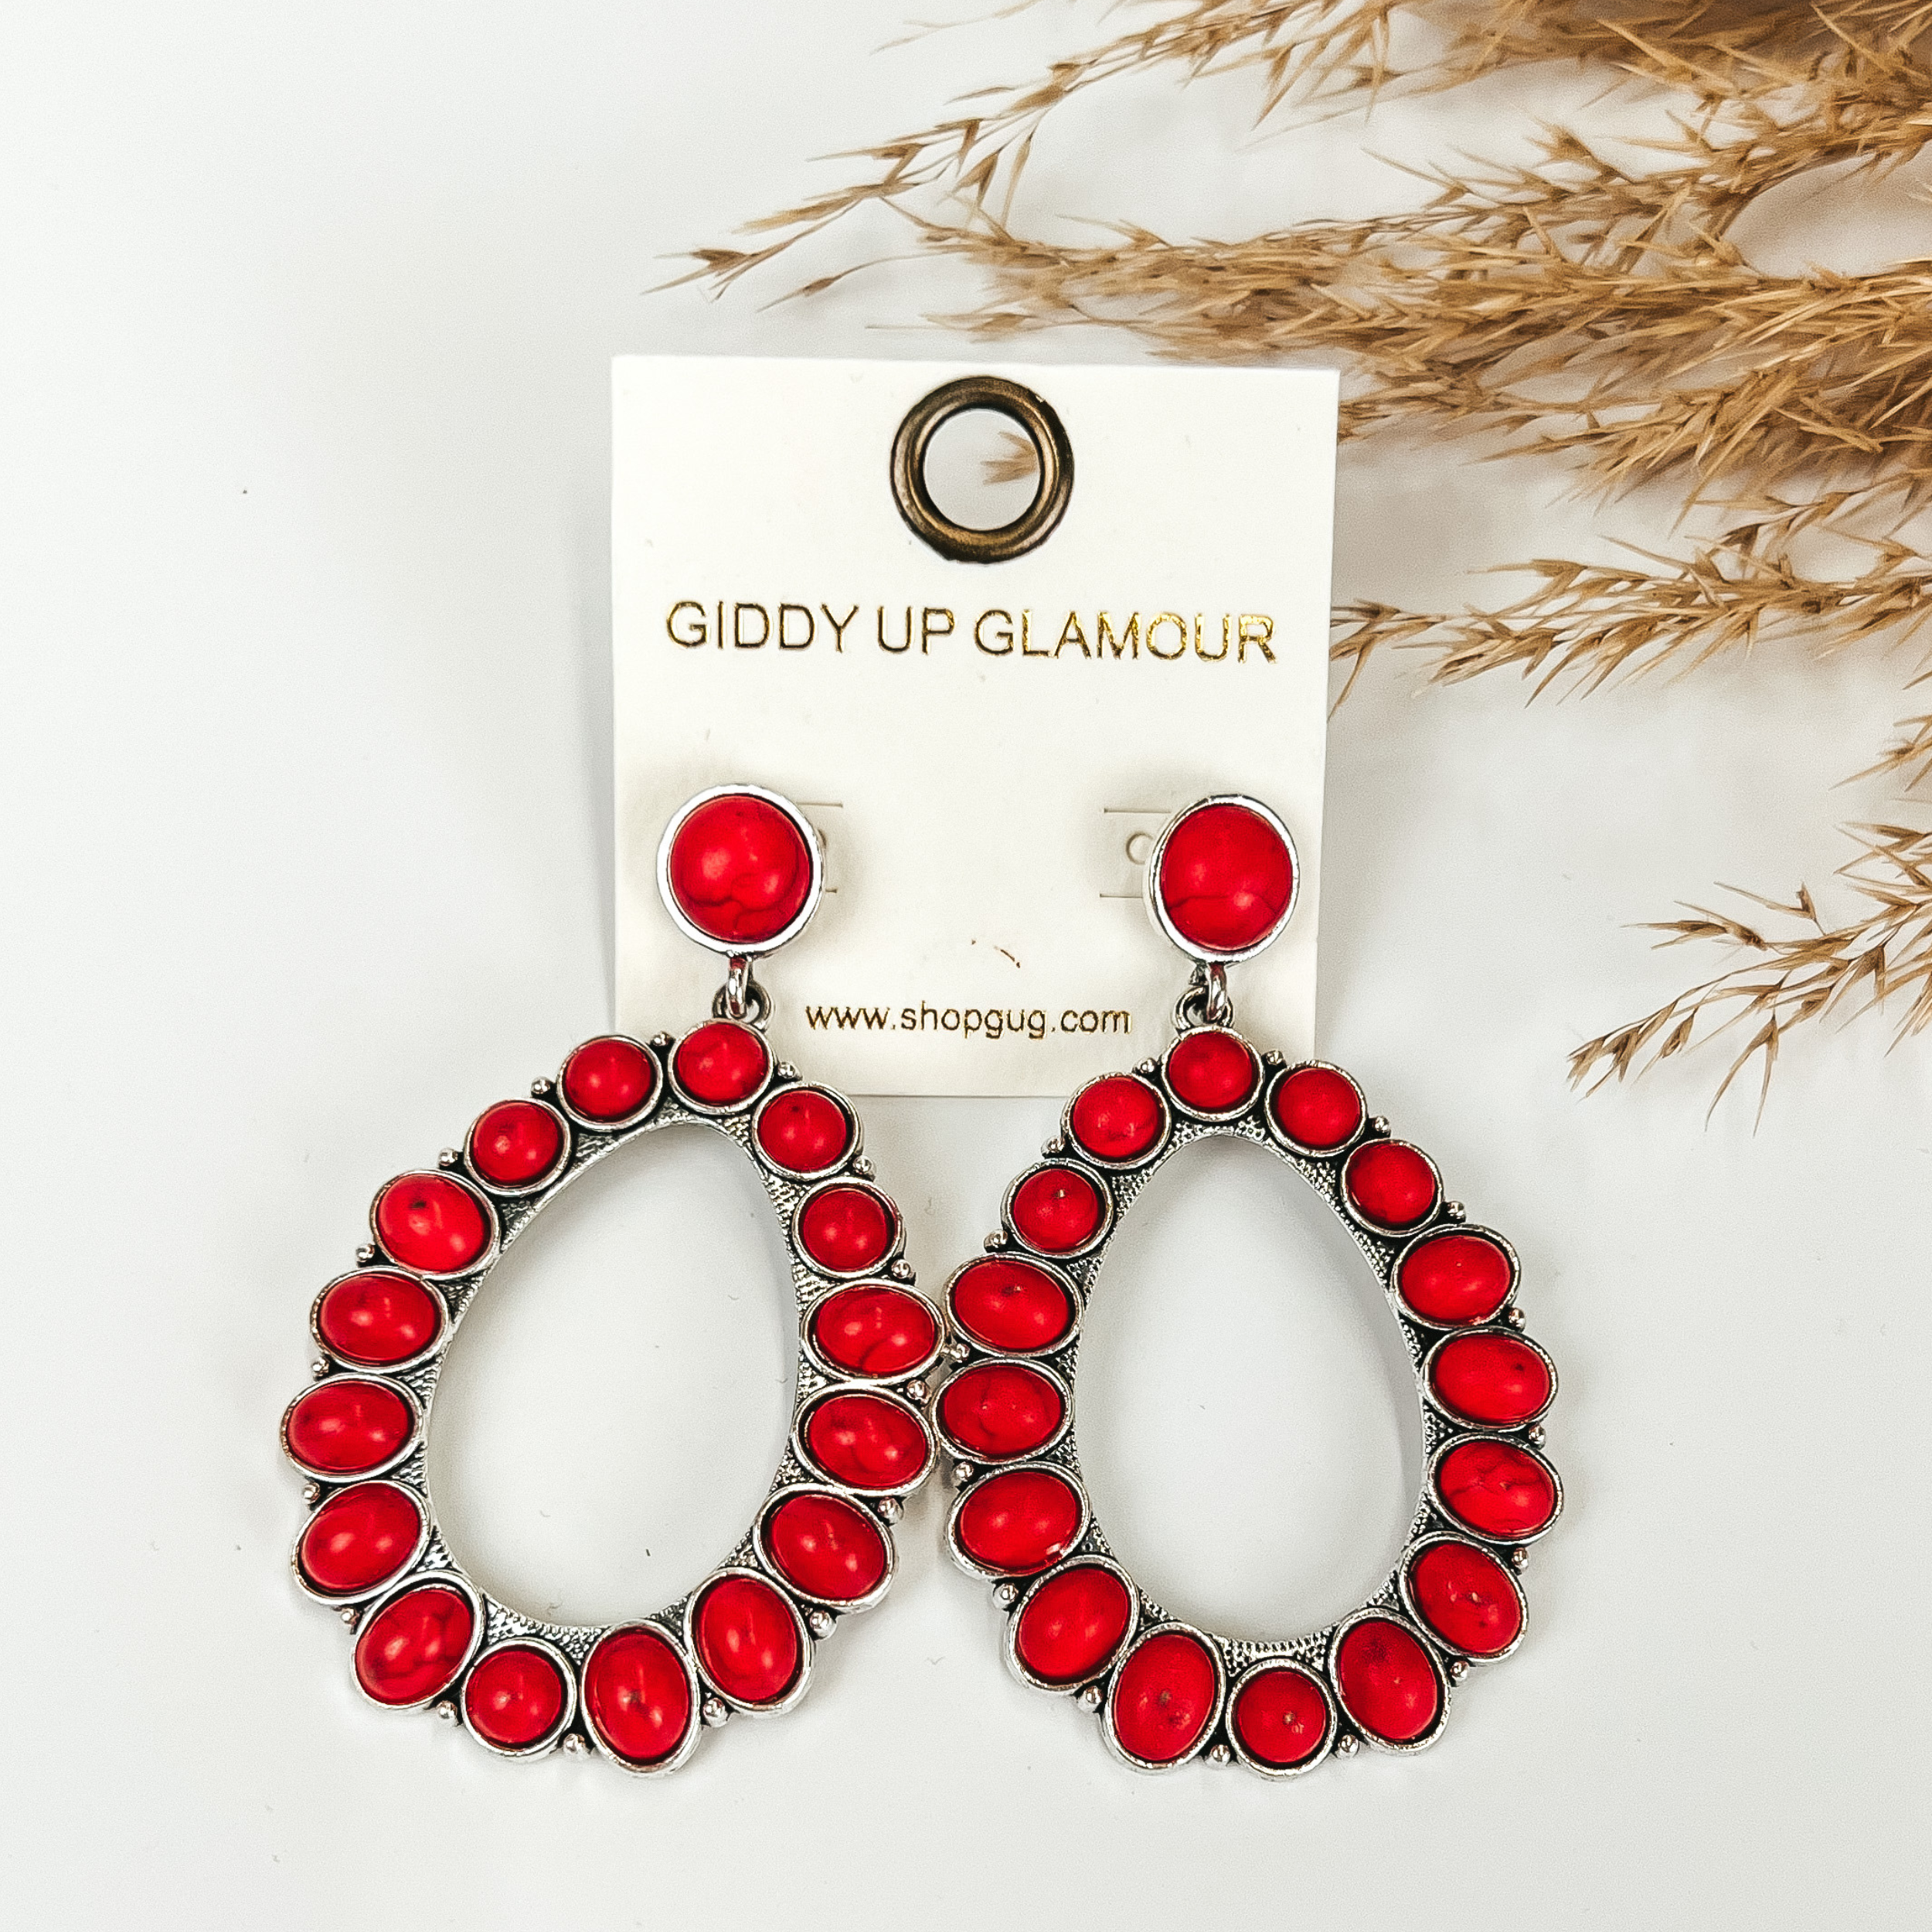 Red stoned teardrop earrings, with pompous grass in the top right hand corner, on a white background. 